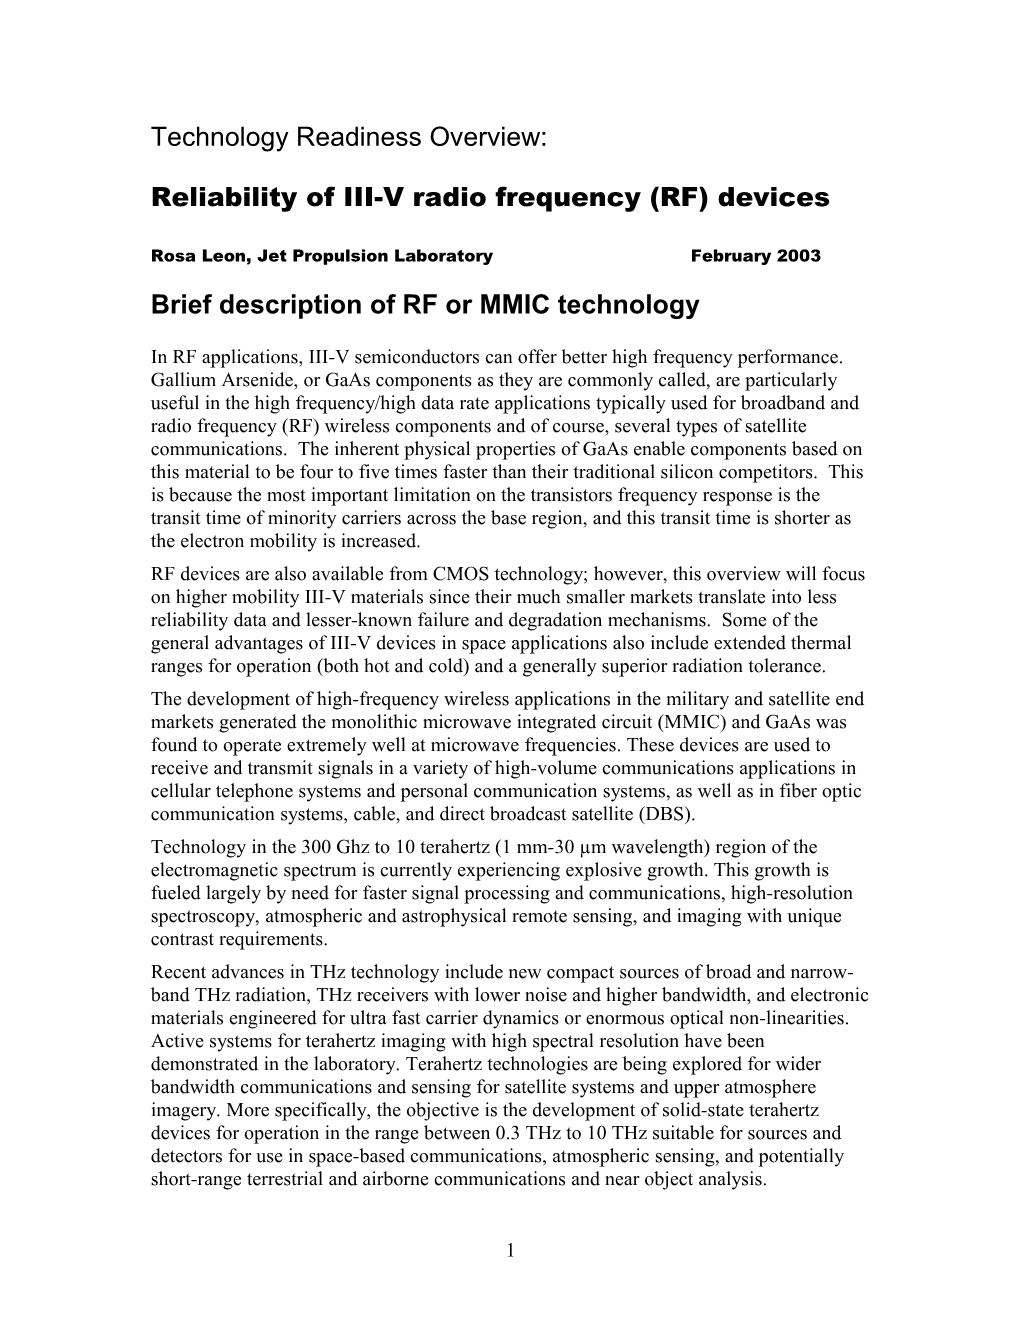 Reliability of III-V Radio Frequency (RF) Devices